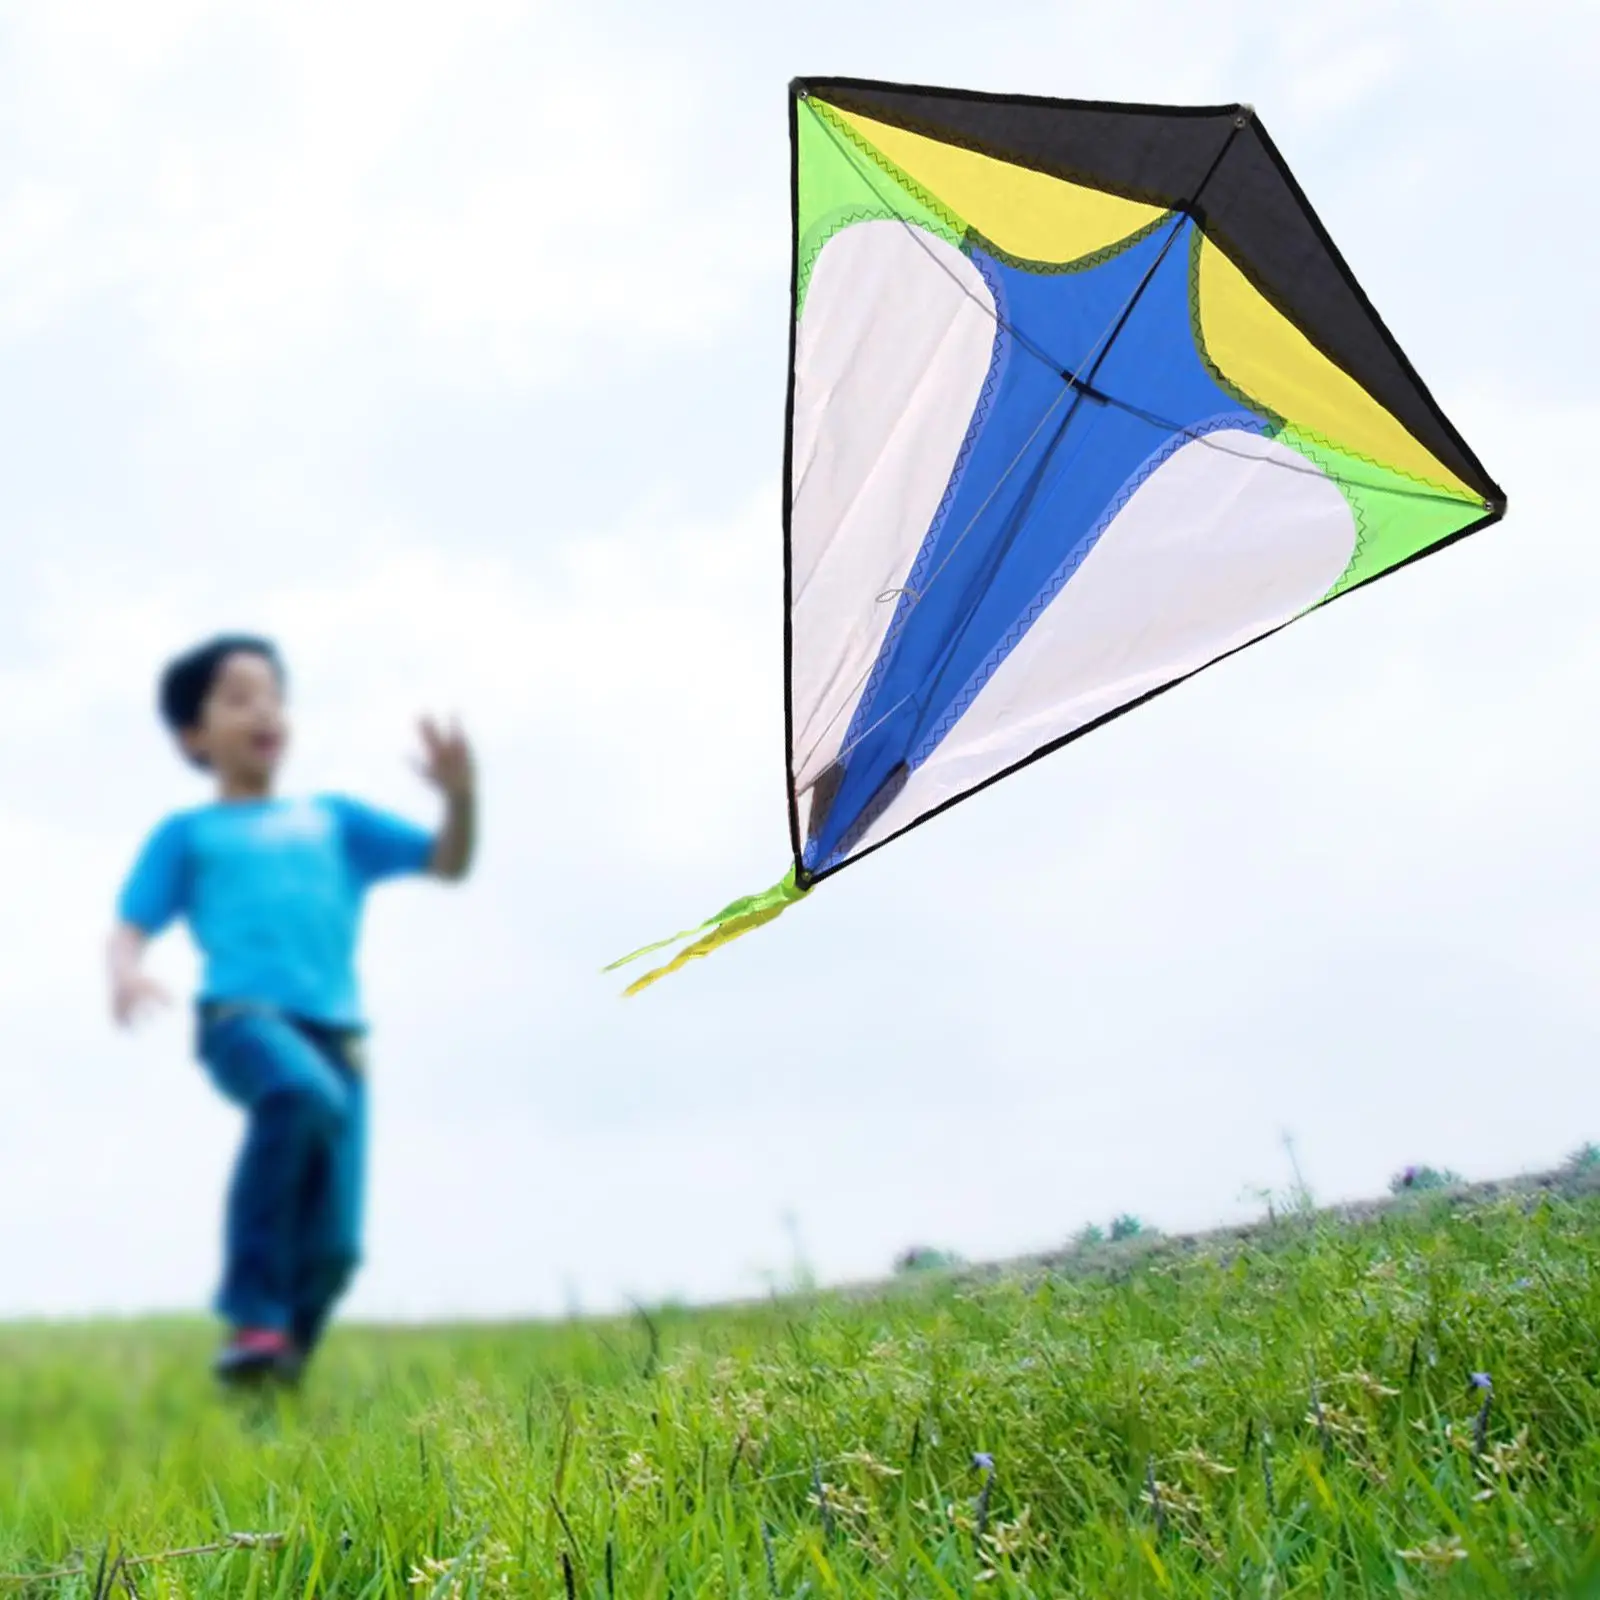 Rainbow Rhombus Kite Fly Kites Easy to Fly Easy to Assemble Durable with Tail Toys for Beginner Kids Adults Sports Trip